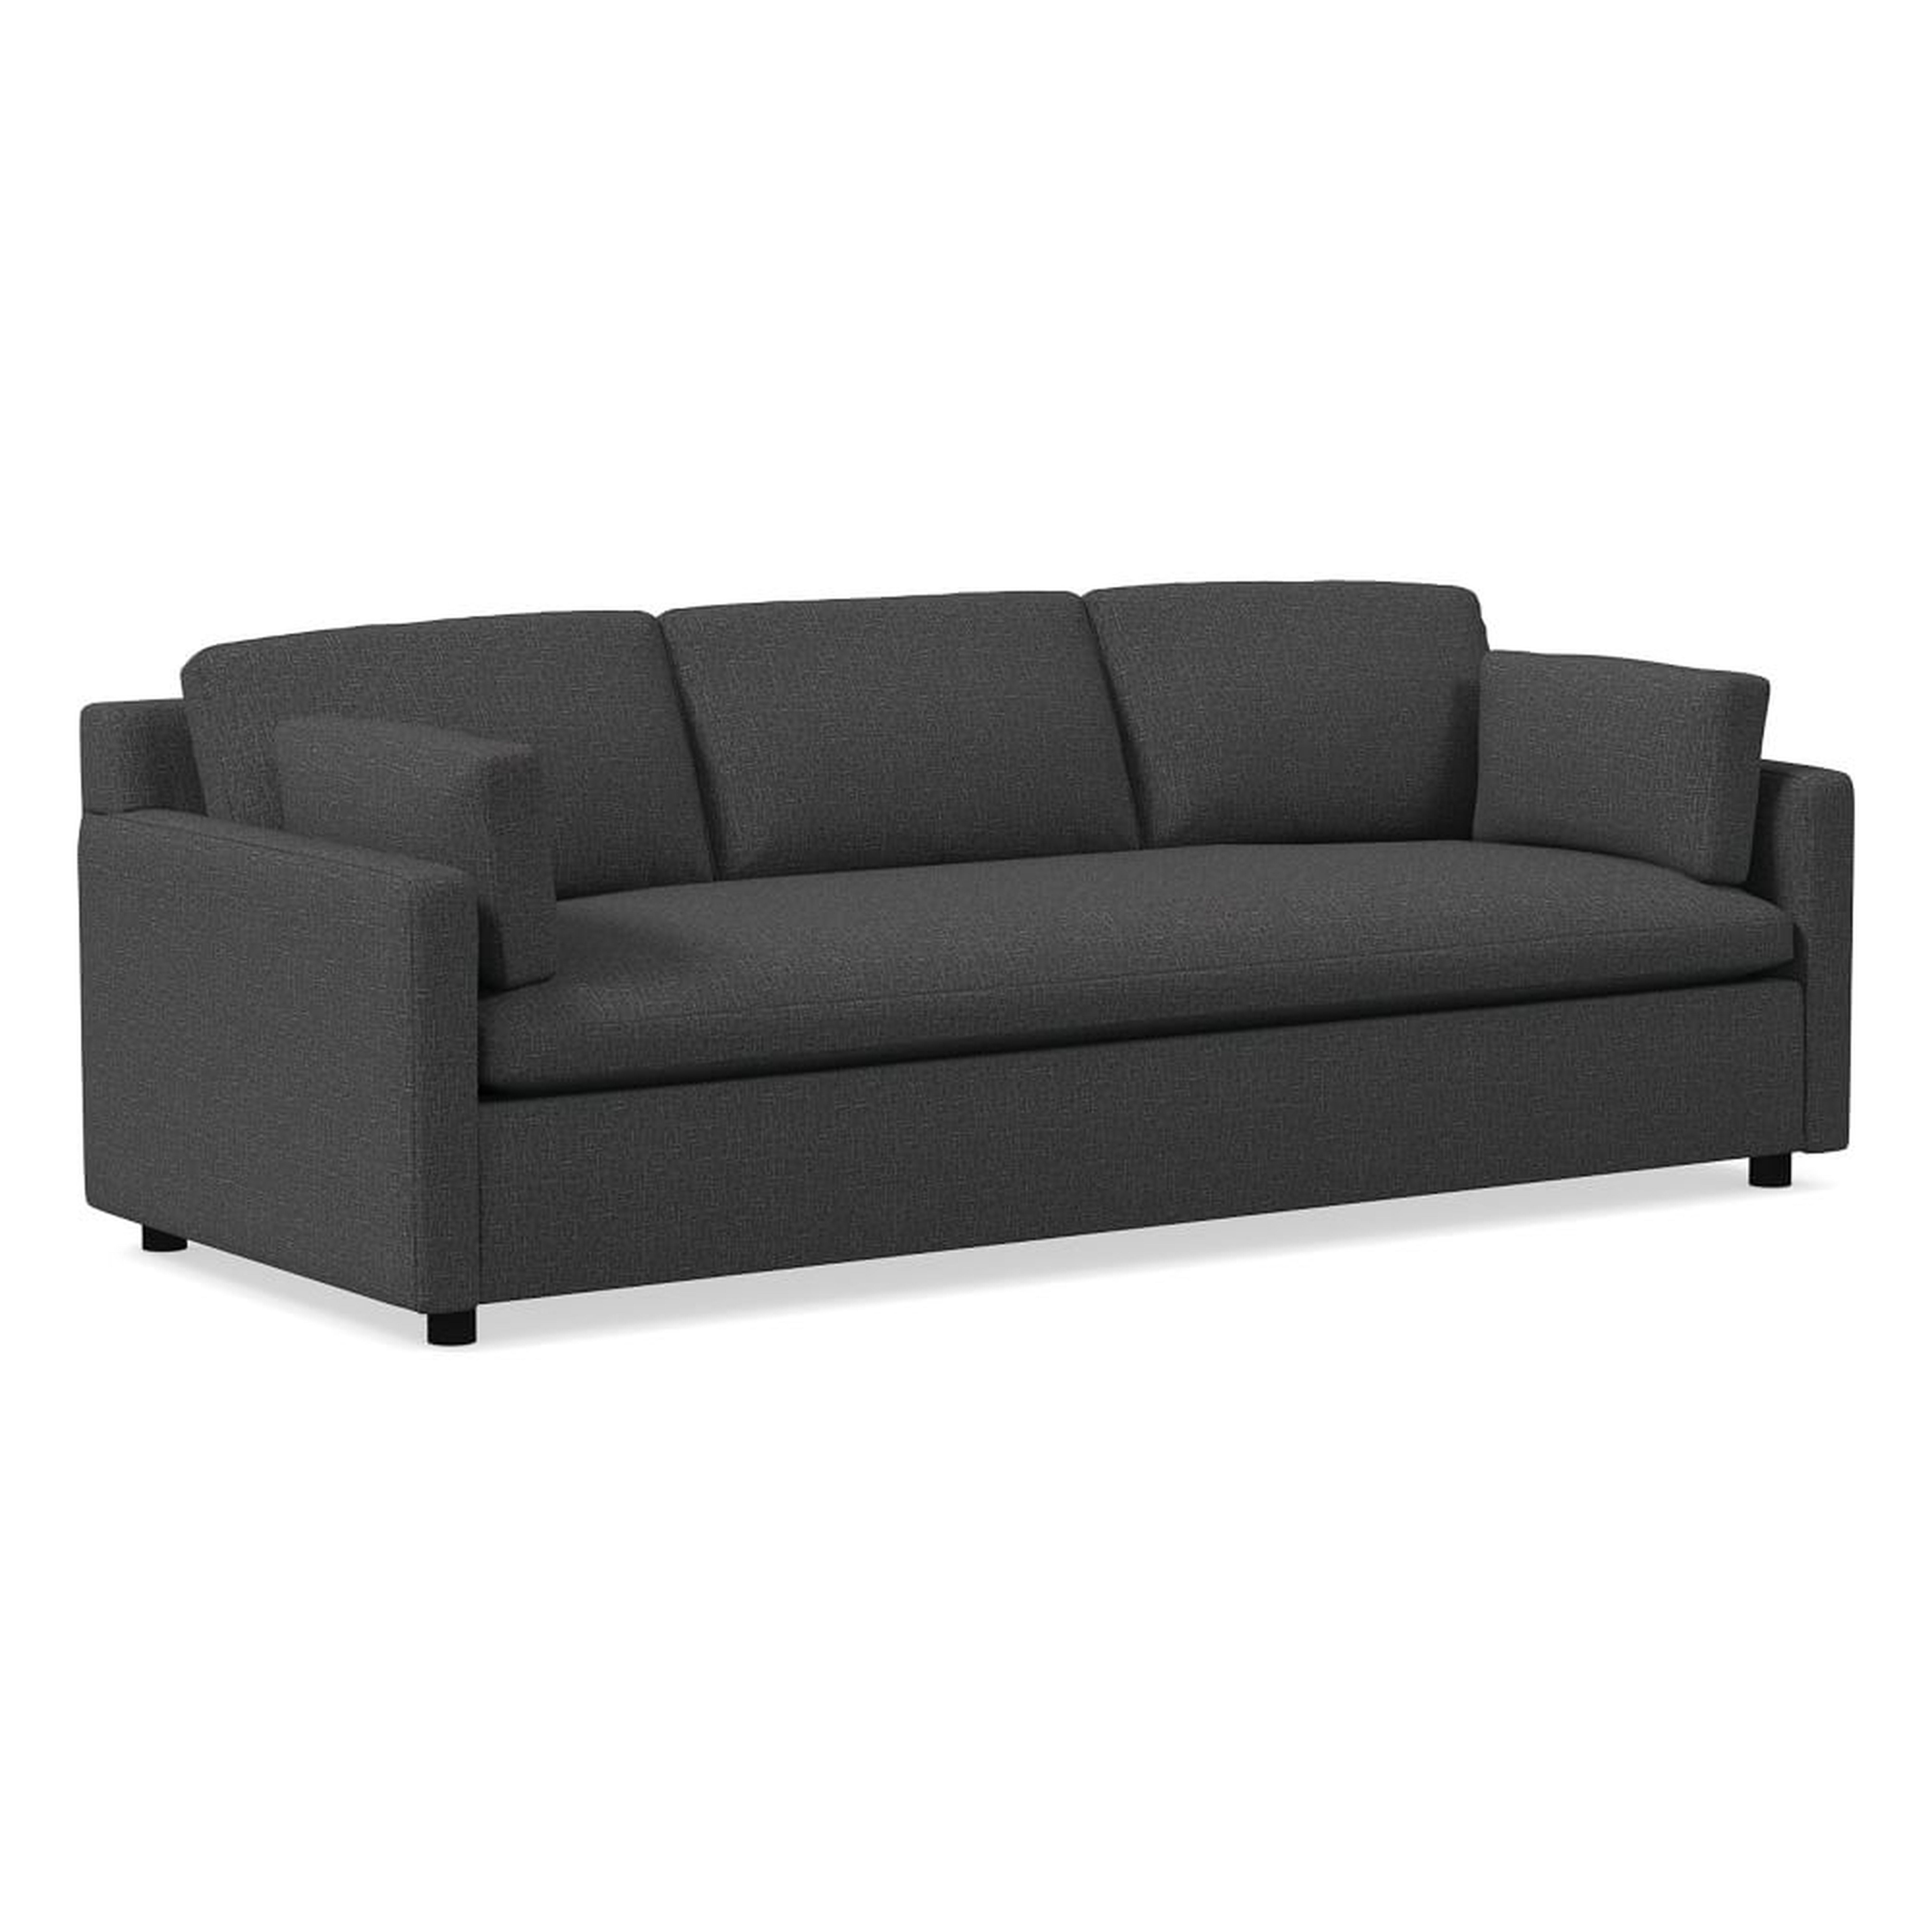 Marin 94" Sofa, Down, Deco Weave, Pewter, Concealed Support - West Elm